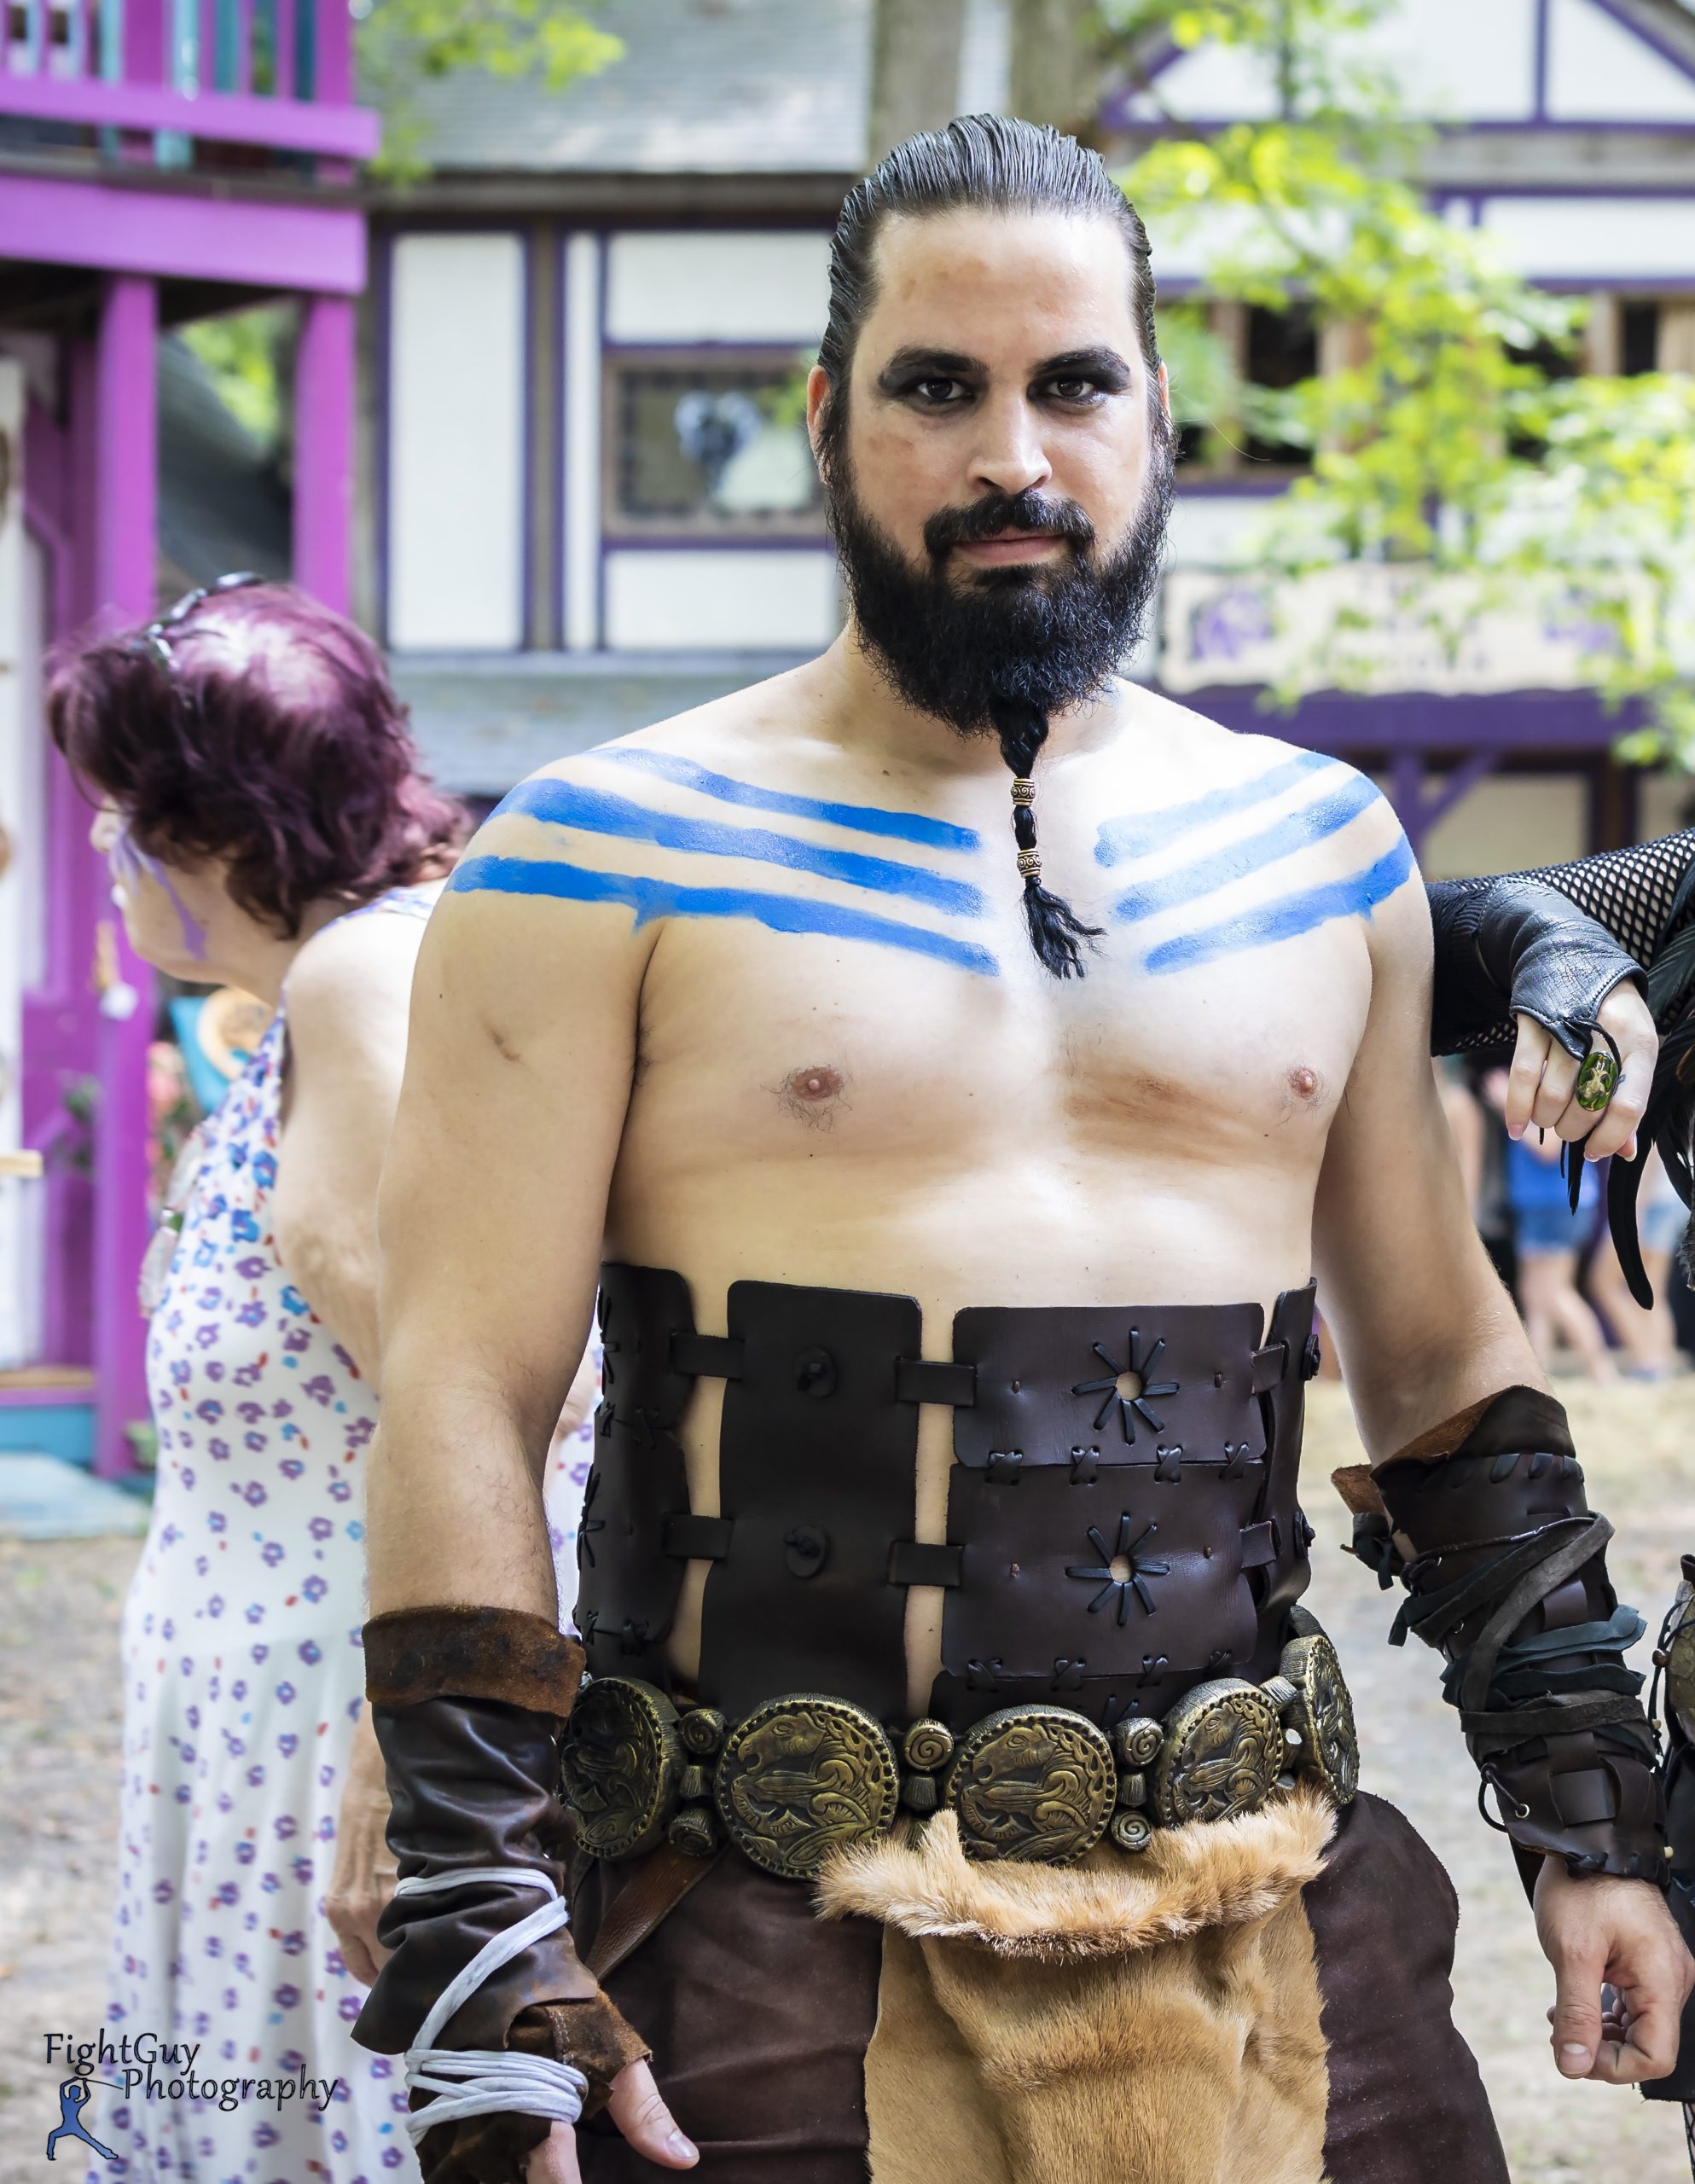 Khal Drogo - Game of Thrones - Trove Costumes